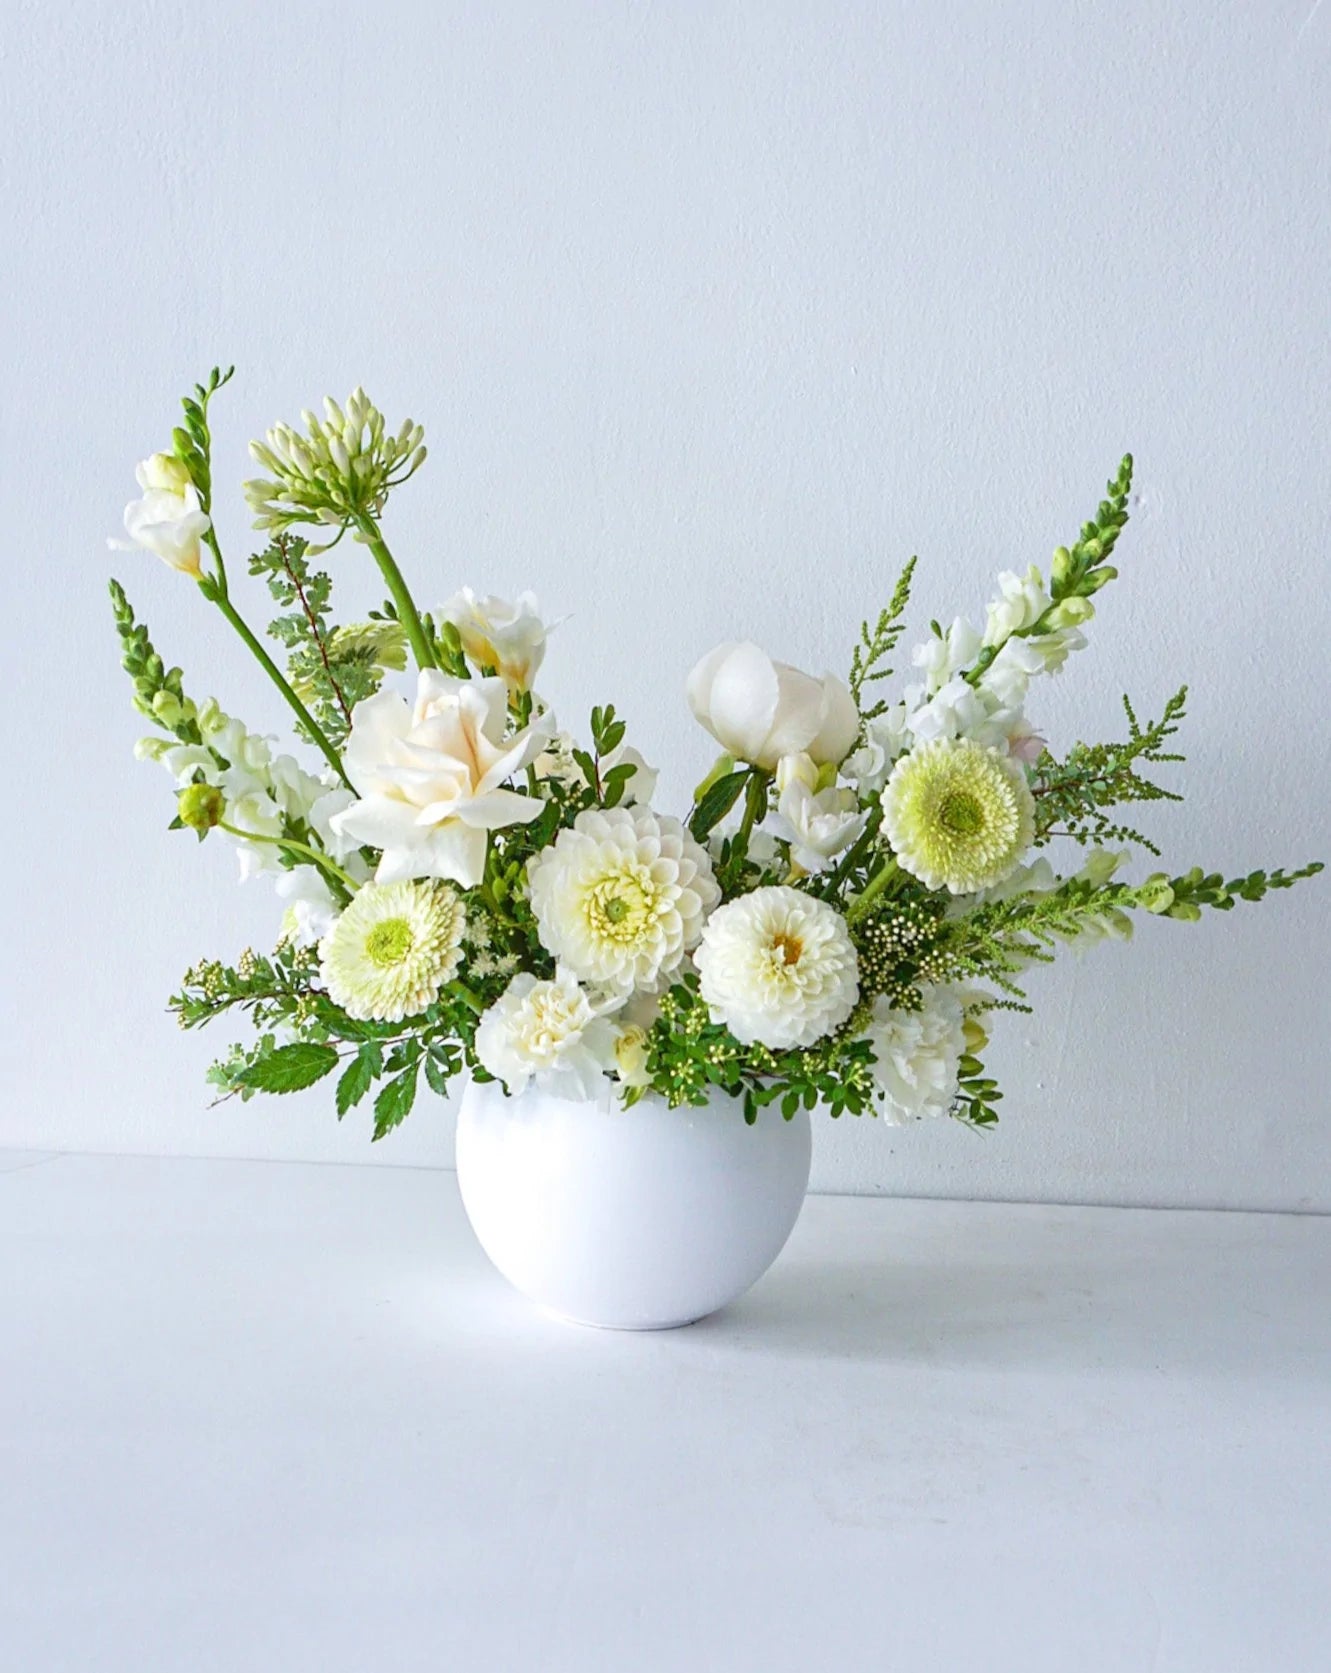 A stylish array of the seasons best crisp white and cream blooms in white bowl - an elegant gift for any occasion. We offer same-day or next-day delivery thought out Toronto and GTA. Toronto  Flower Delivery- The Flower Nook- Toronto Florist 